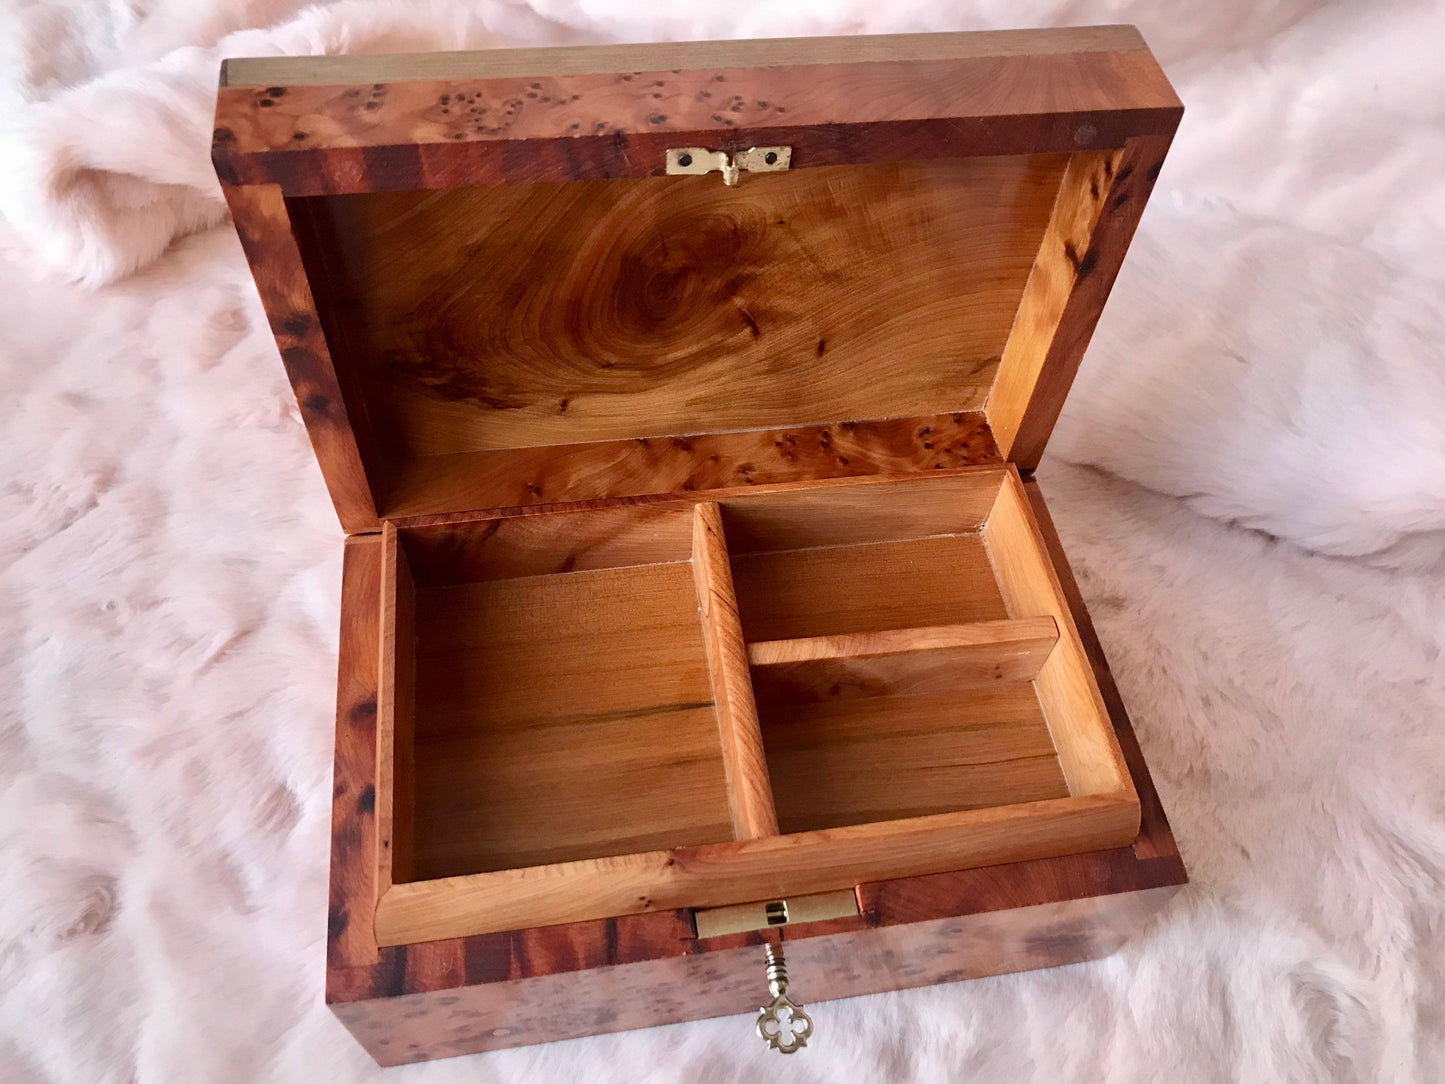 8"x5" Luxury wood box with key,inlaid with Mother of Pearl,lockable wooden jewellery Box,Couples gift,wedding Jewelry memory,decorative box